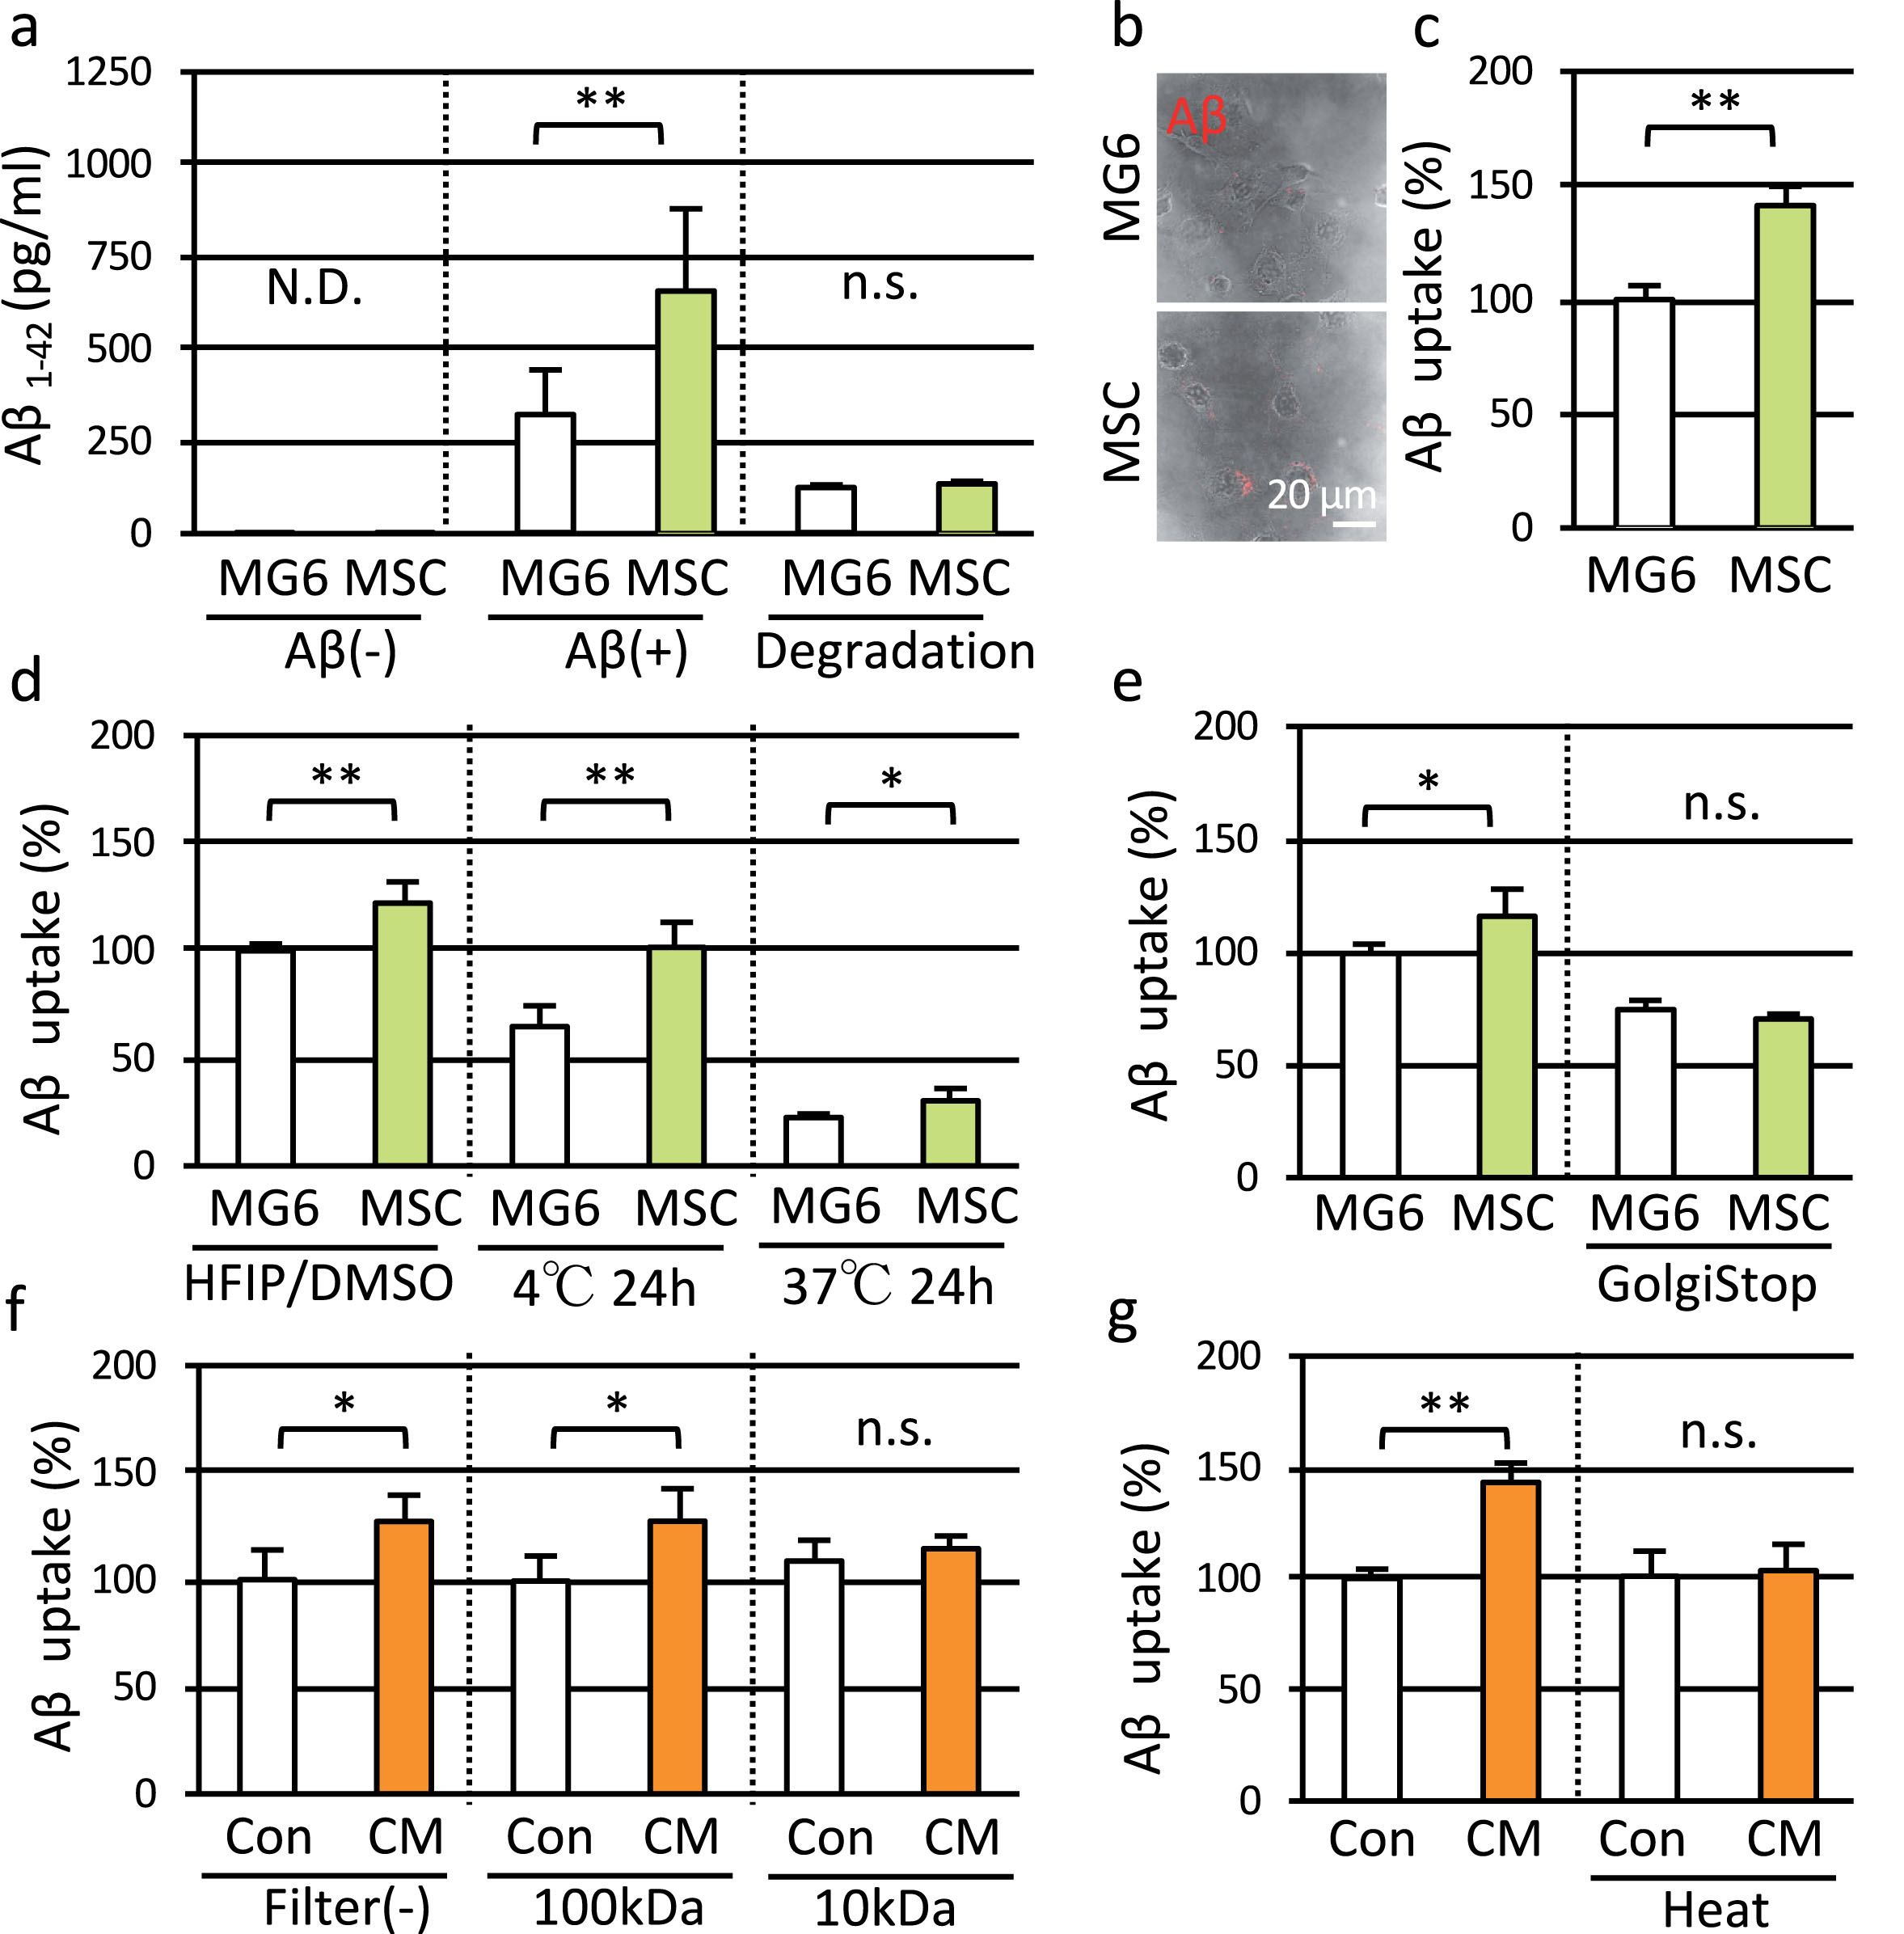 MSC accelerated microglial clearance of Aβ in vitro. a) MG6 cells were co-cultured with MG6 cells or MSC for 24 h. Amount of Aβ1–42 in MG6 cells was measured before exposure to Aβ [Aβ (–)], after exposure to Aβ for 3 h [Aβ(+)], and 3 h after washout of Aβ (Degradation), using ELISA. MG6 cells were exposed to fluorescent labeled Aβ and MG132 for 15 min. b) Representative images of labeled Aβ taken up by MG6 cells. Scale bar; 20 μm. c–g) Fluorescent intensity of labeled Aβ was analyzed by flowcytometry as Aβ uptake. d) Uptake of monomeric Aβ (HFIP/DMSO), oligomeric Aβ (4°C 24 h) and fibrillar Aβ (37°C 24 h). e) Uptake of Aβ when secretion from MSC was blocked by Golgistop. f) Effect of conditioned medium of MG6 cells (Con) or conditioned medium of MSC (CM) on Aβ uptake by MG6 cells. Conditioned medium was filtered through 100 kDa ultrafiltration filter (100 kDa), 10 kDa ultrafiltration filter (10 kDa), or non-filtered [Filter (–)]. g) Effect of heated conditioned medium (Heat). N.D., not detected; n.s., not significant.